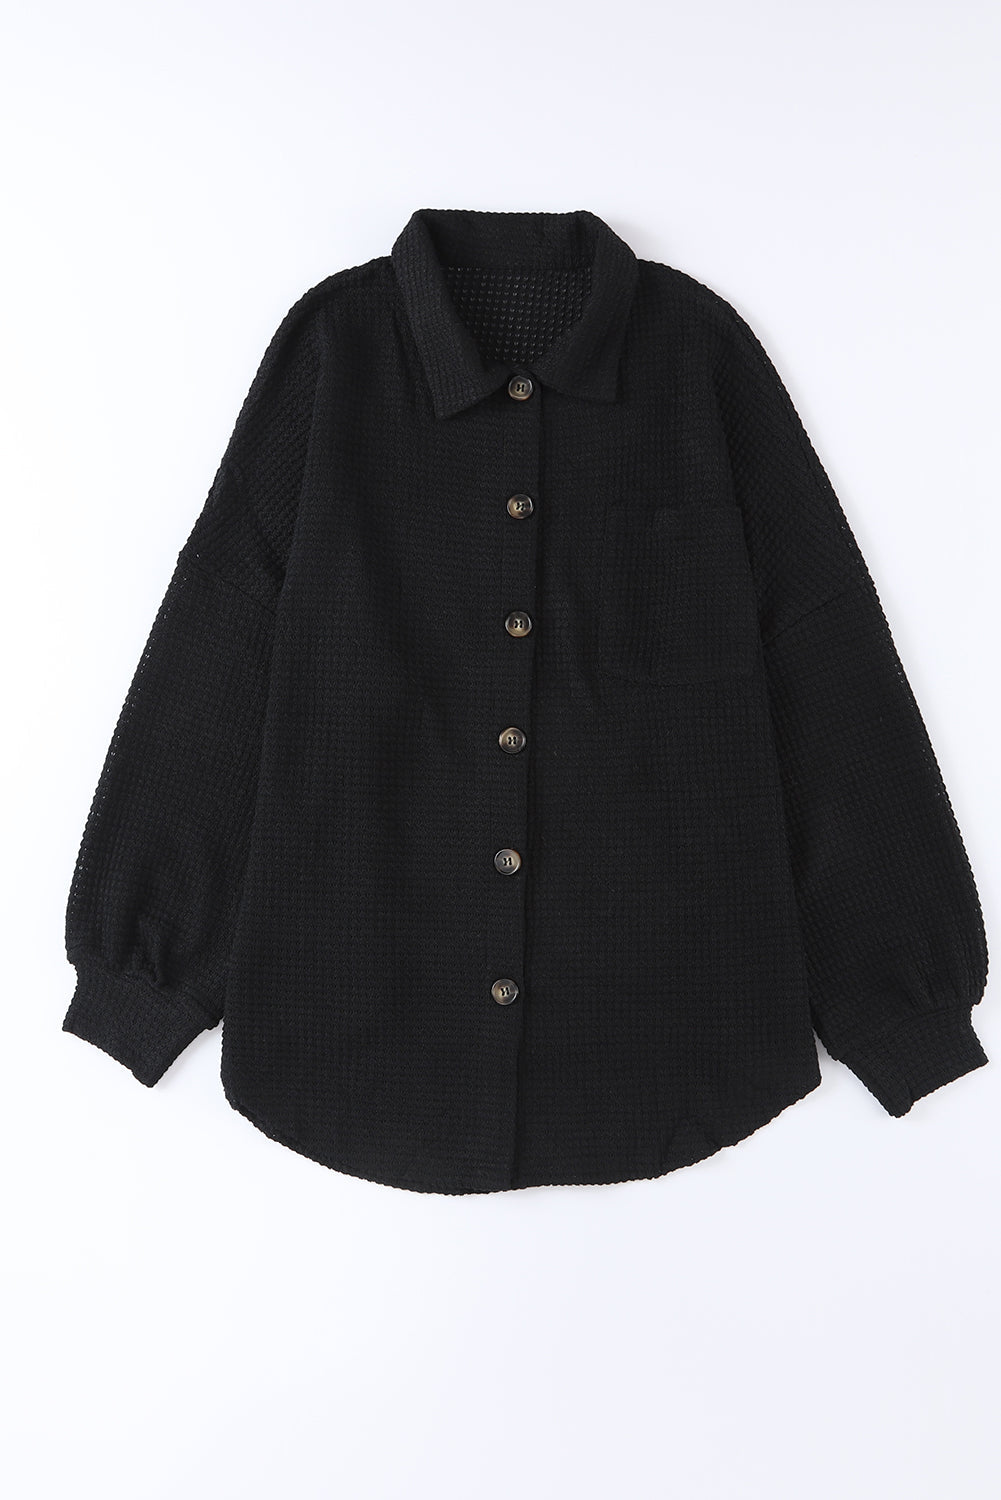 Black Waffle Knit Button Up Casual Shirt-6